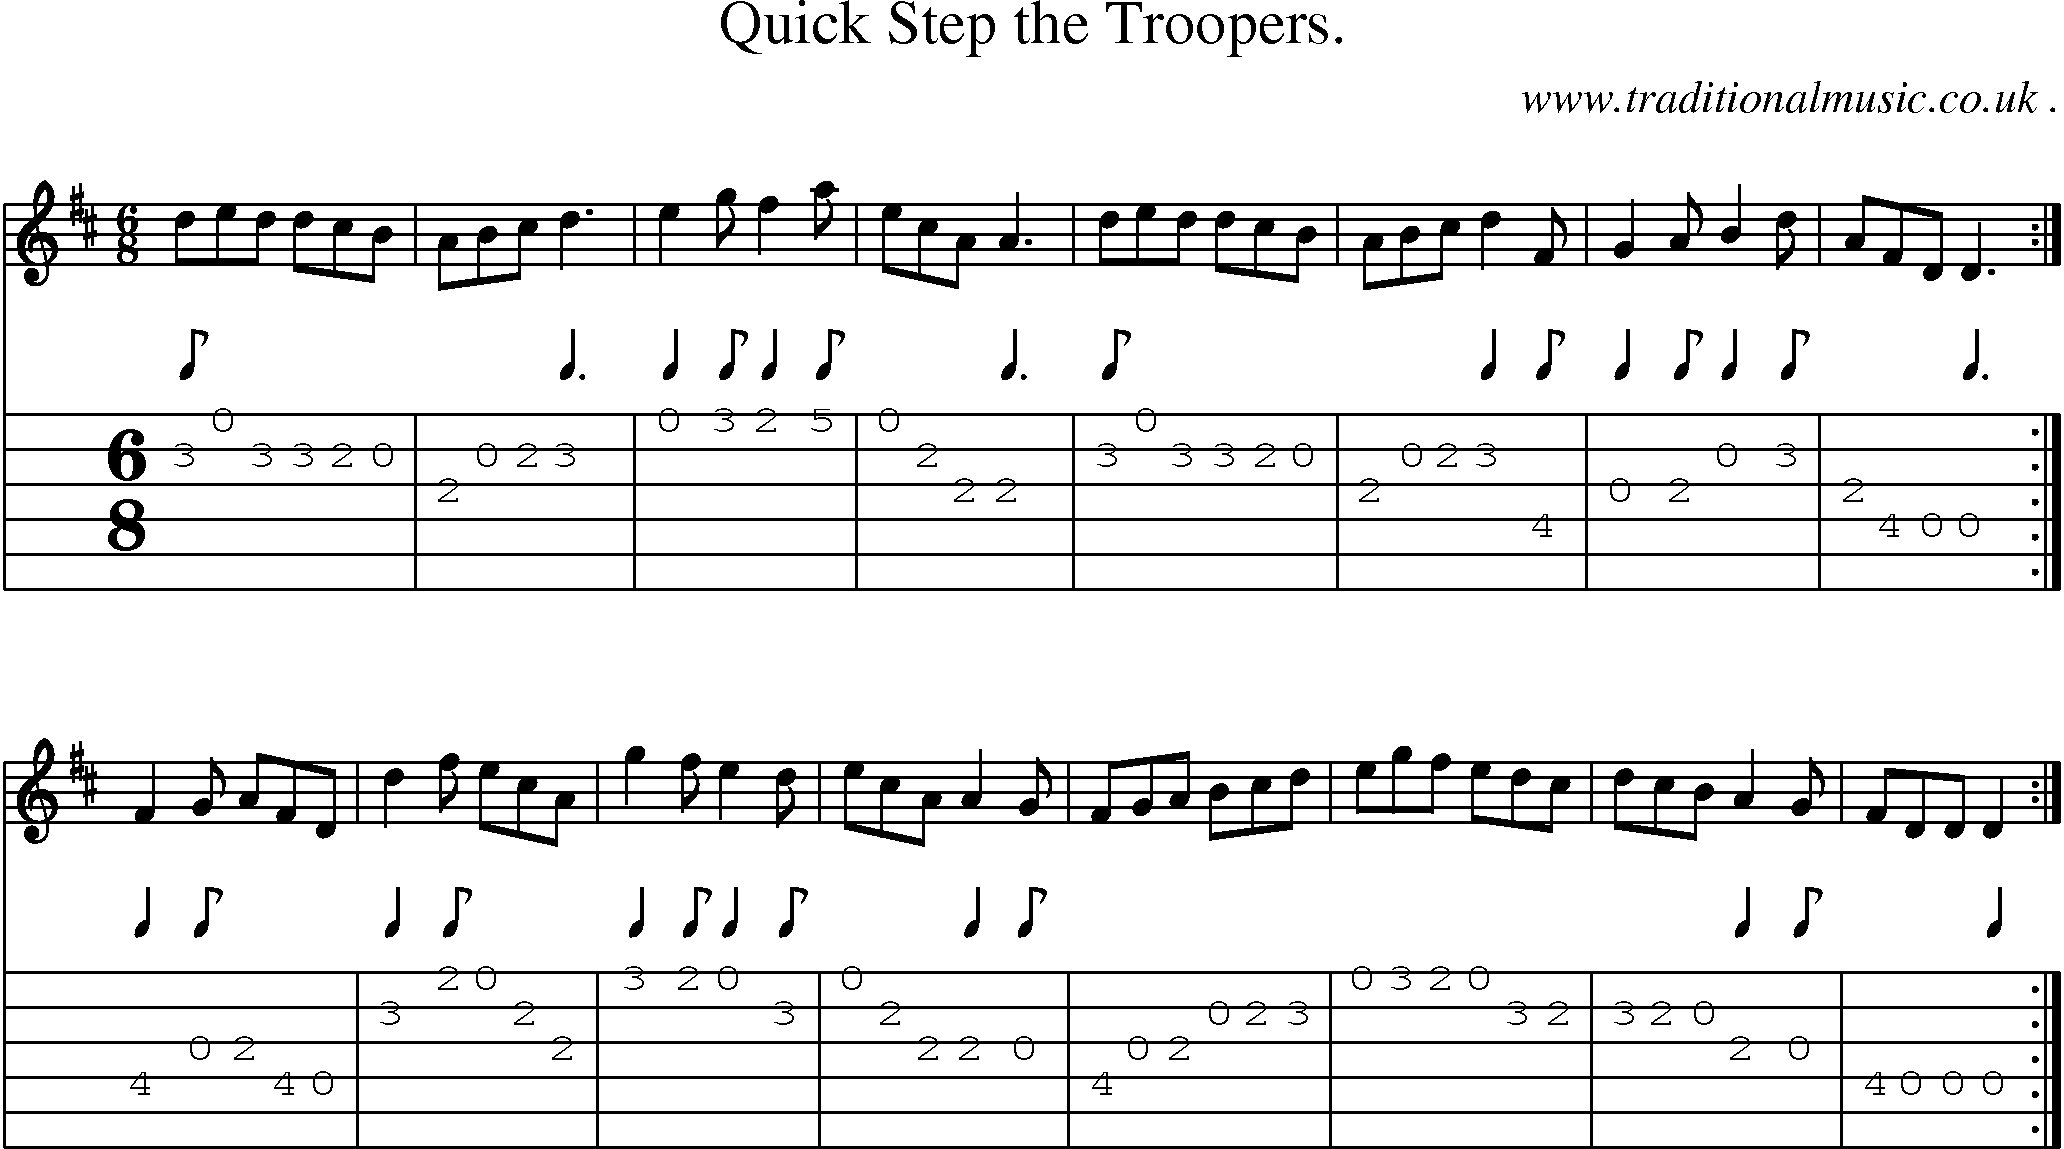 Sheet-music  score, Chords and Guitar Tabs for Quick Step The Troopers